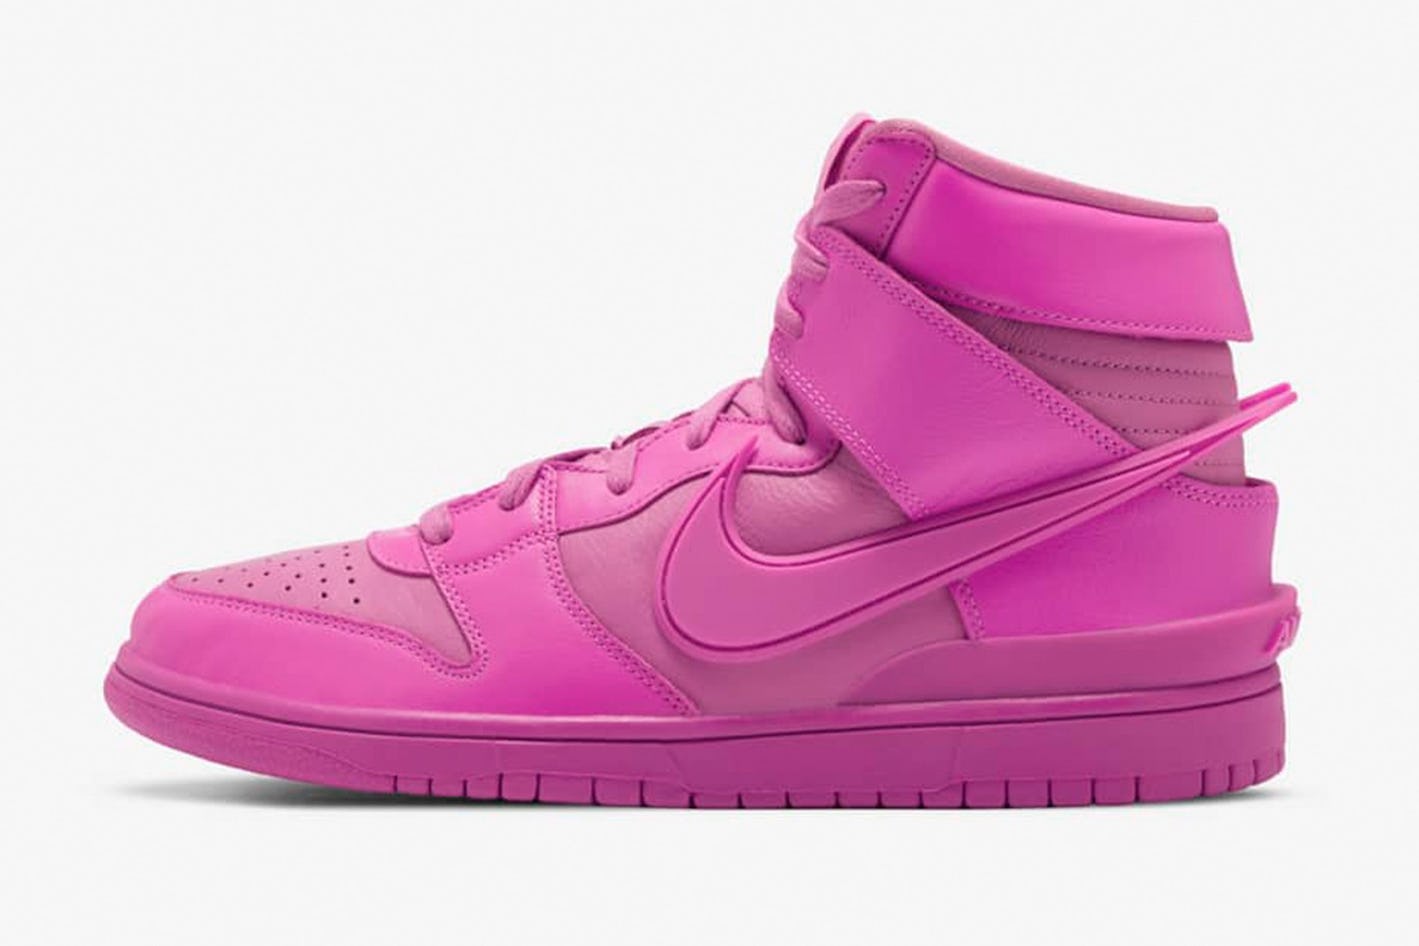 Ambush's pink Nike Dunk High may be the brightest sneaker we see all year